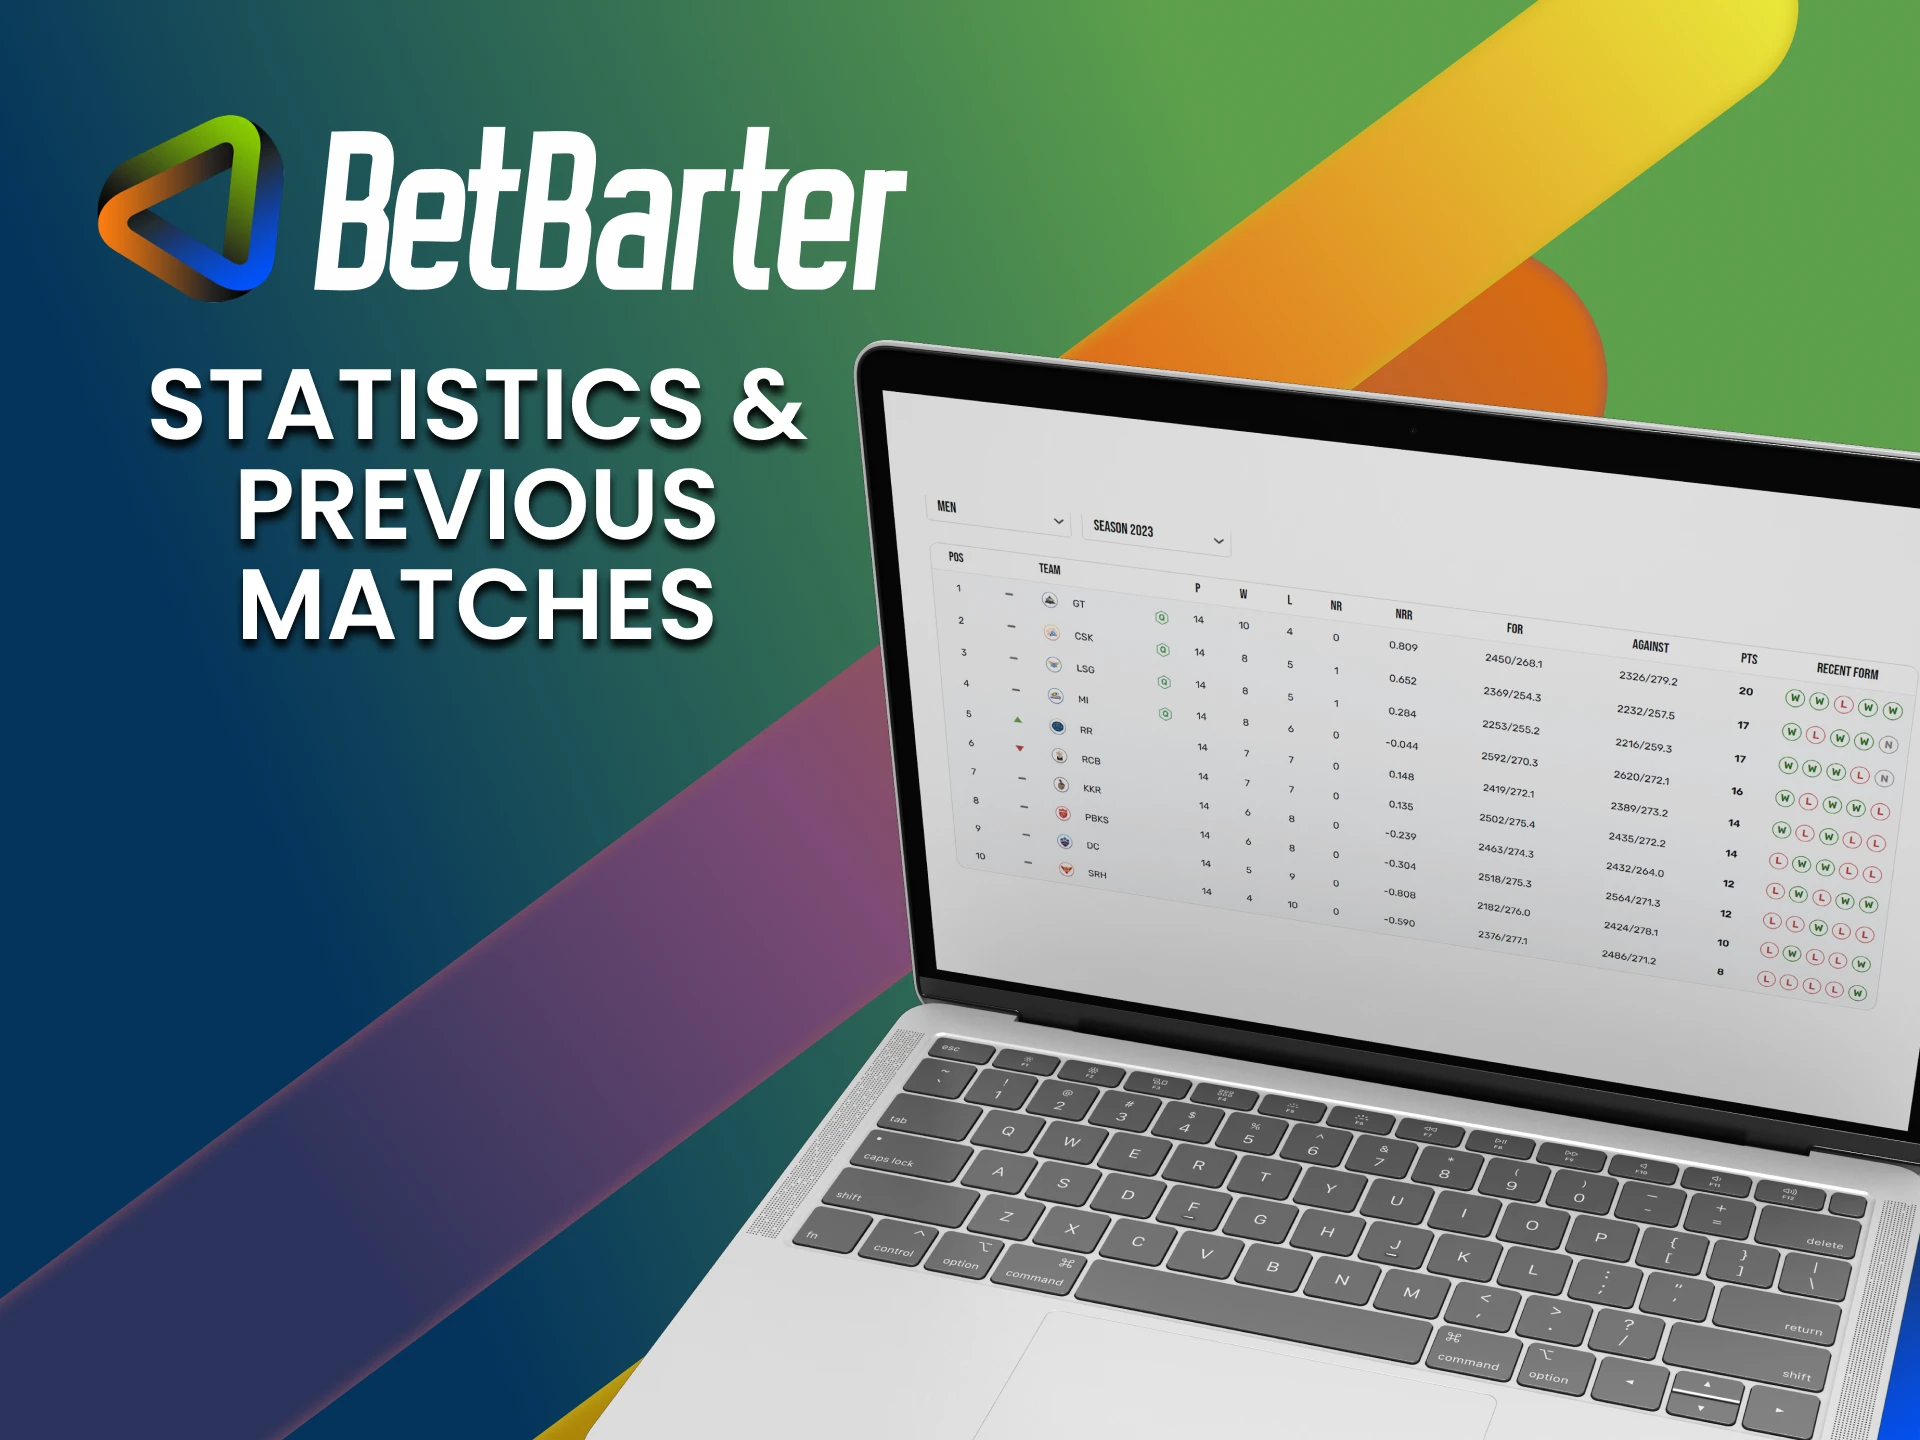 Be sure to check out the game statistics of IPL teams on BetBarter.